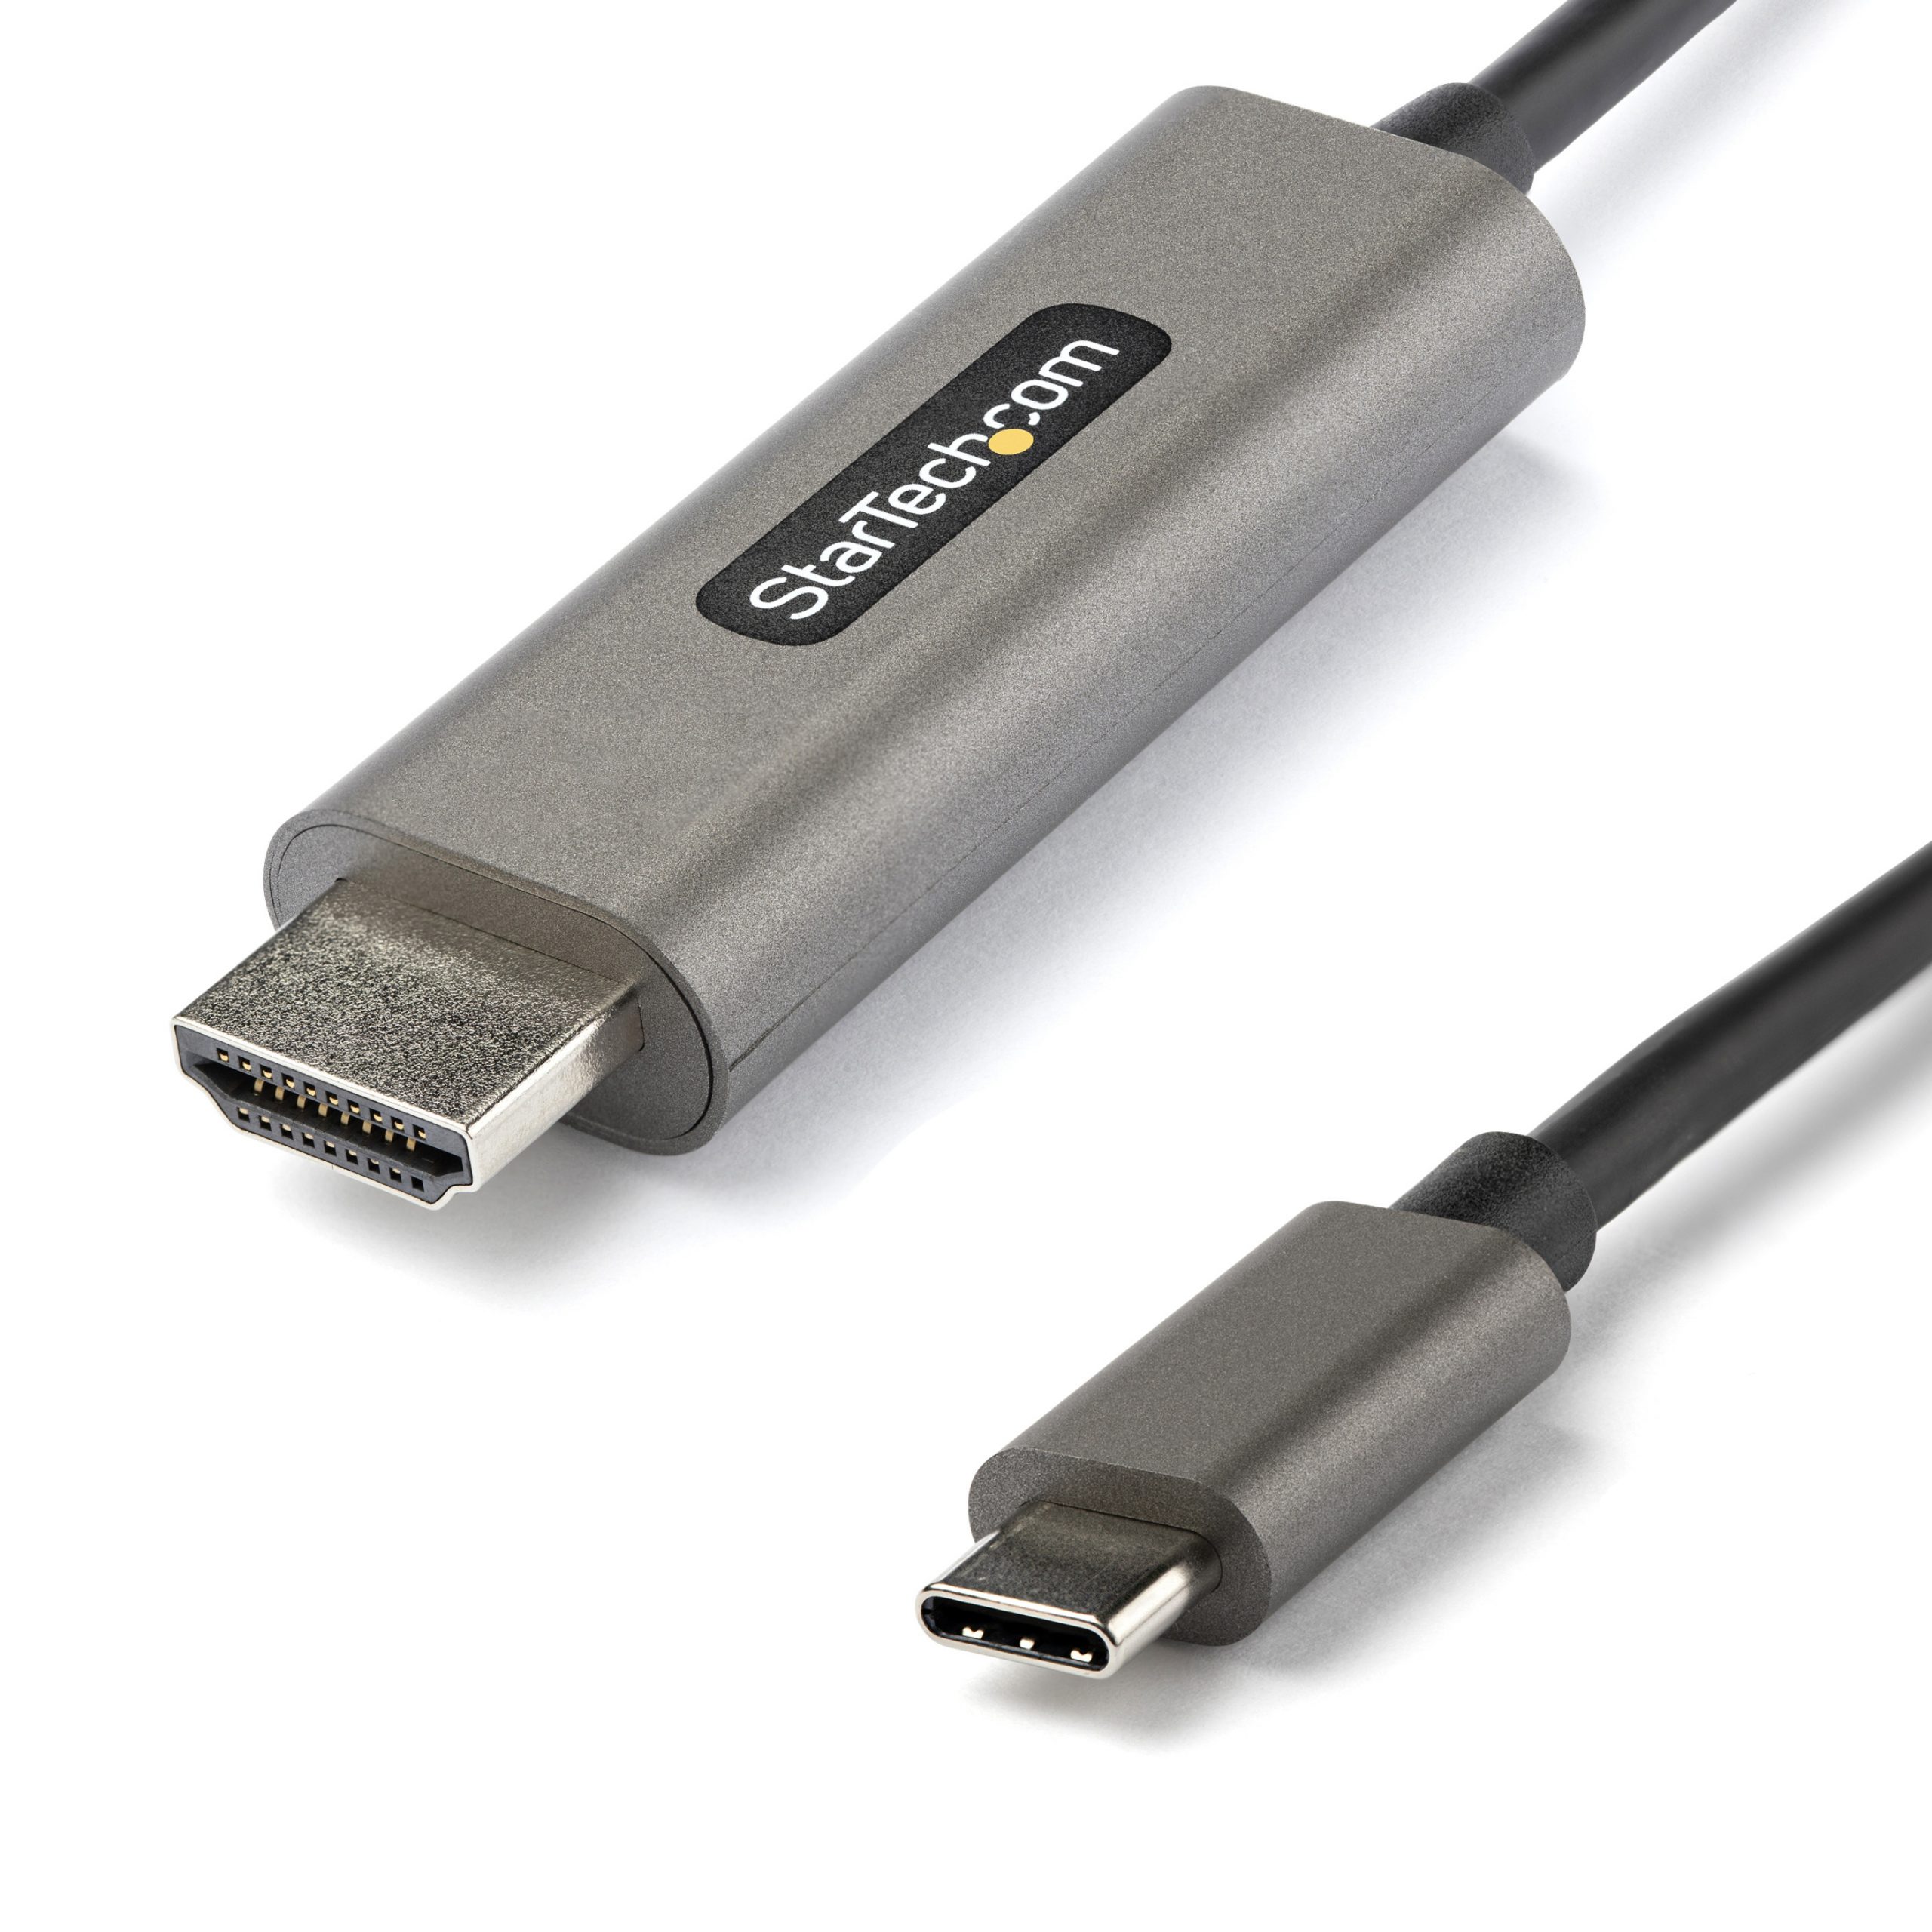 16ft (5m) USB C to HDMI Cable 4K 60Hz with Ultra HD USB Type-C to HDMI 2.0b Video Adapter Cable, DP 1.4 Alt Mode HBR3 -... CDP2HDMM5MH - Corporate Armor